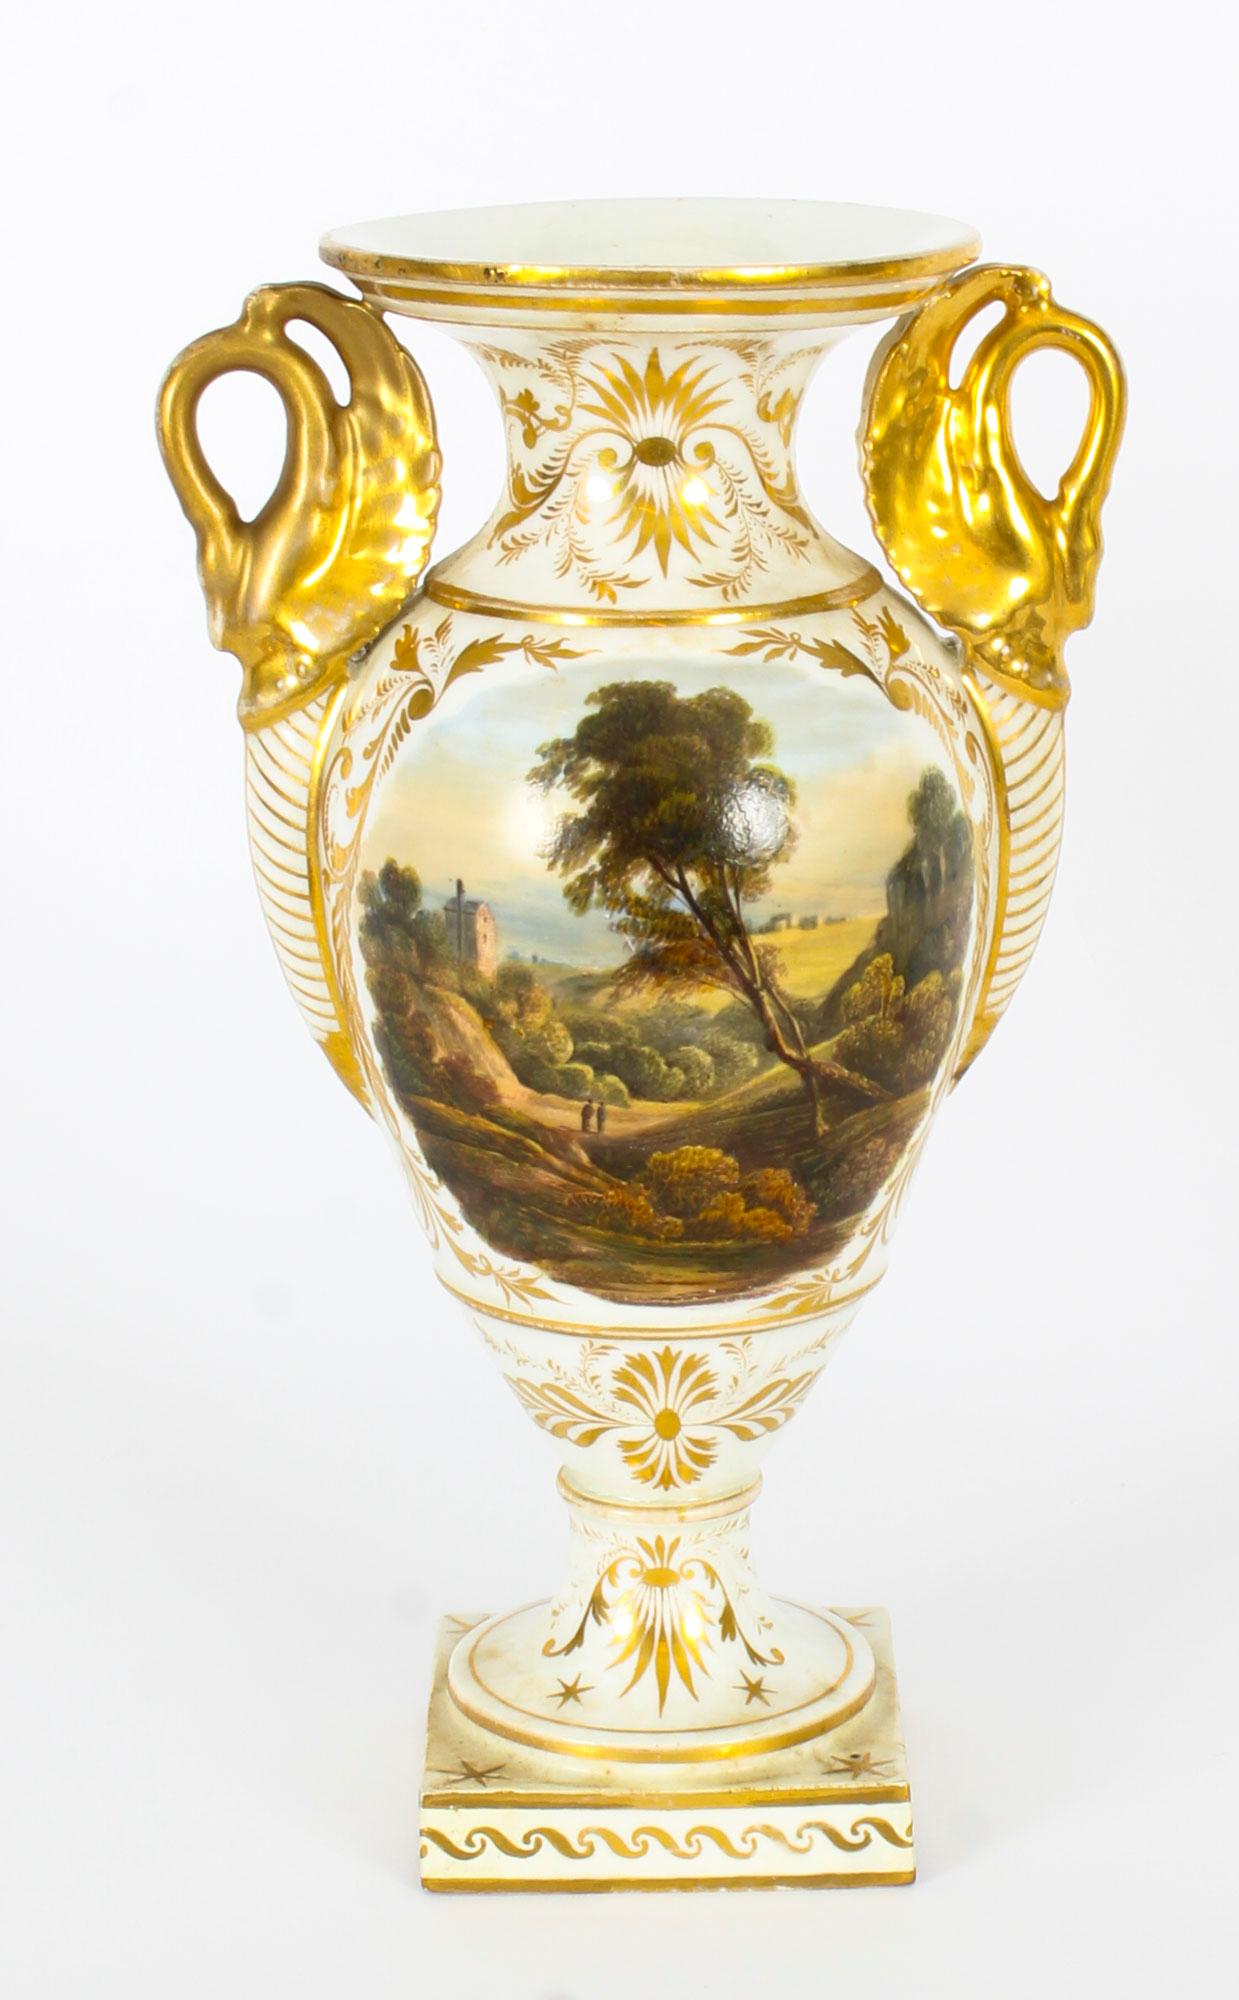 This is a truly superb pair of Derby twin handled square based slender ovoid cabinet vases, circa 1790 in date and bearing the Derby painted mark with crown and D on the undersides.

With gilt leaf moulded swan neck handles and delicate scrolled